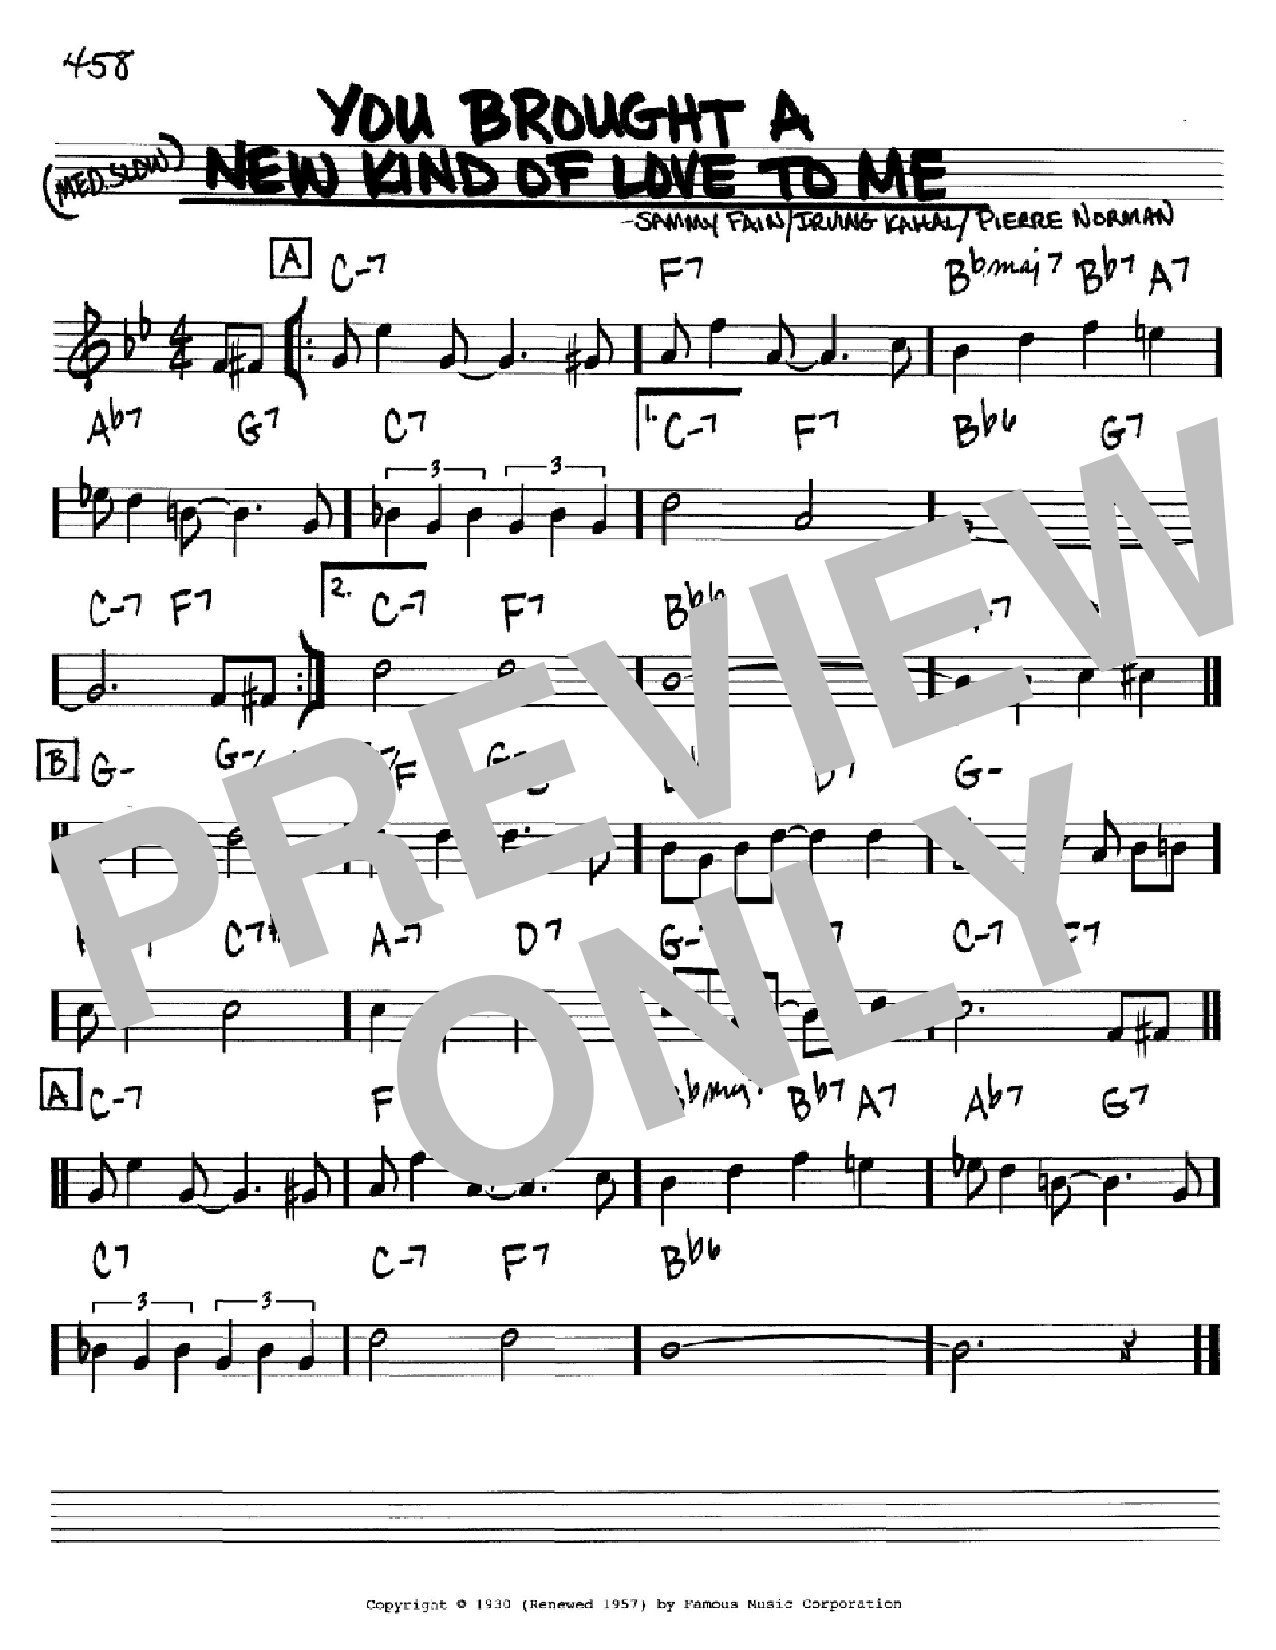 Download Frank Sinatra You Brought A New Kind Of Love To Me Sheet Music